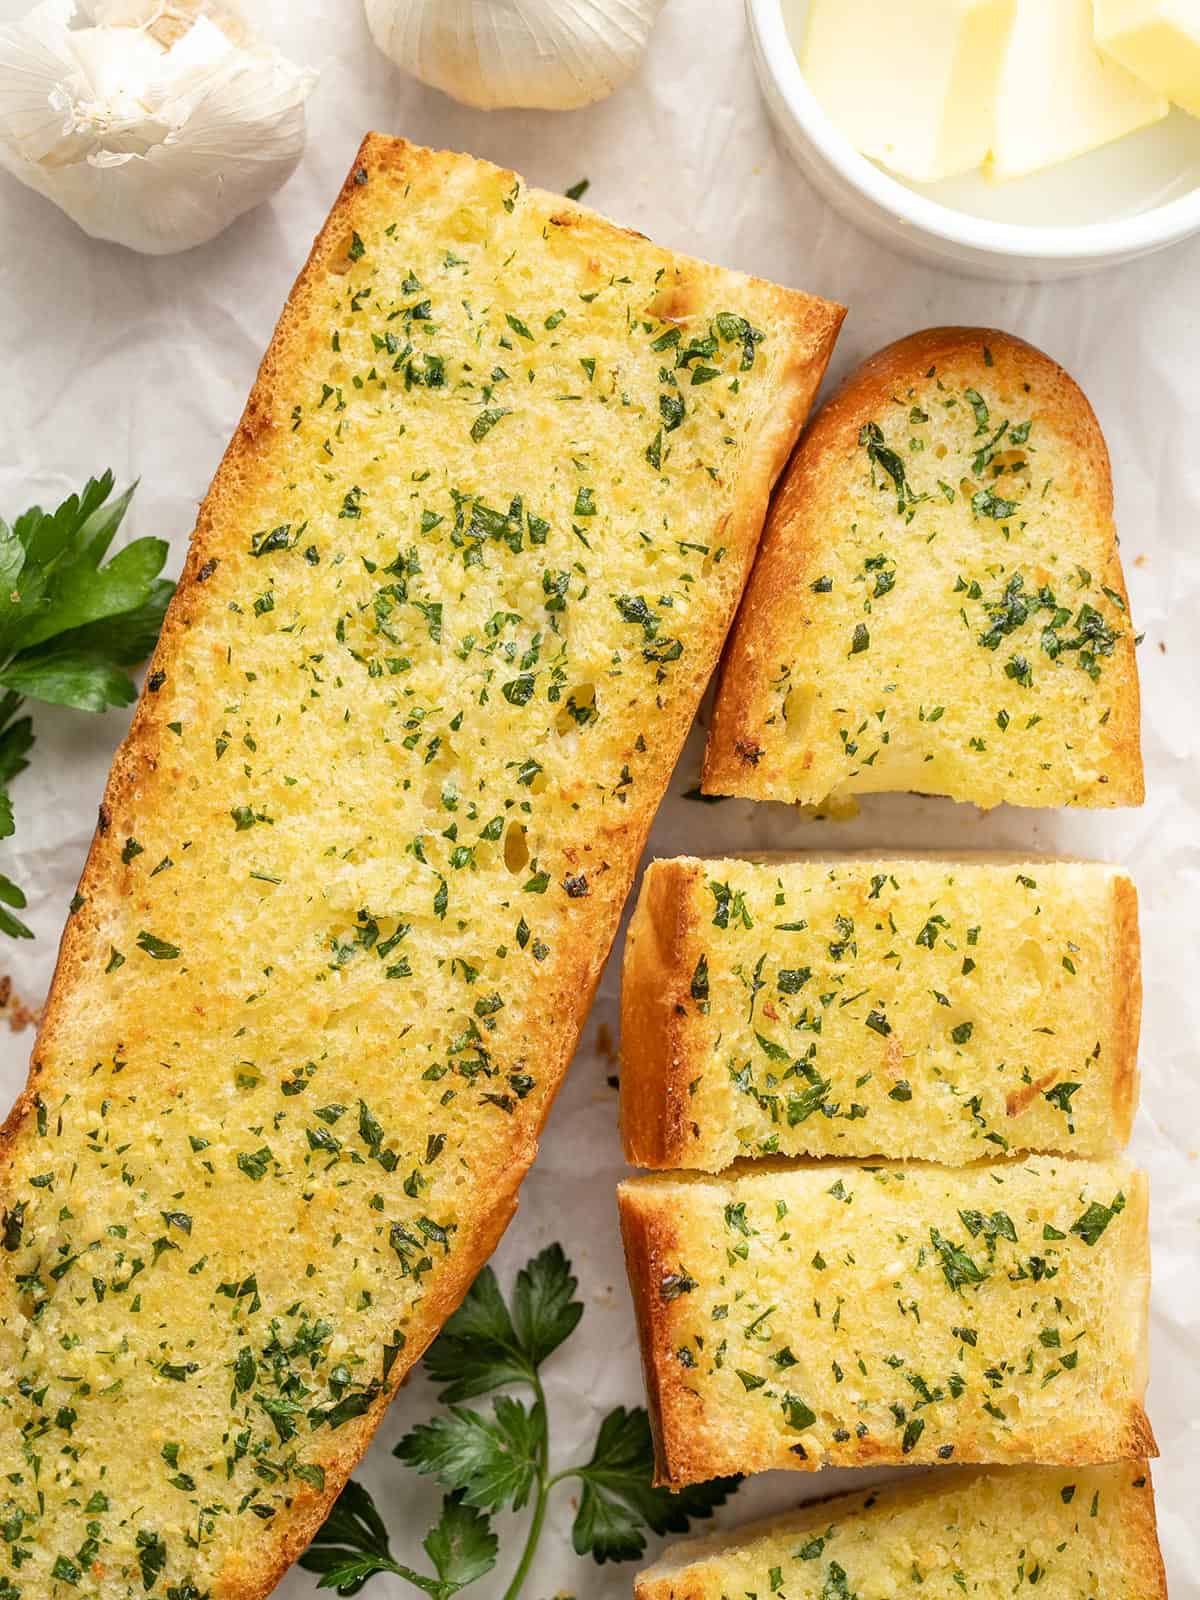 Two large pieces of garlic bread, one sliced into pieces.